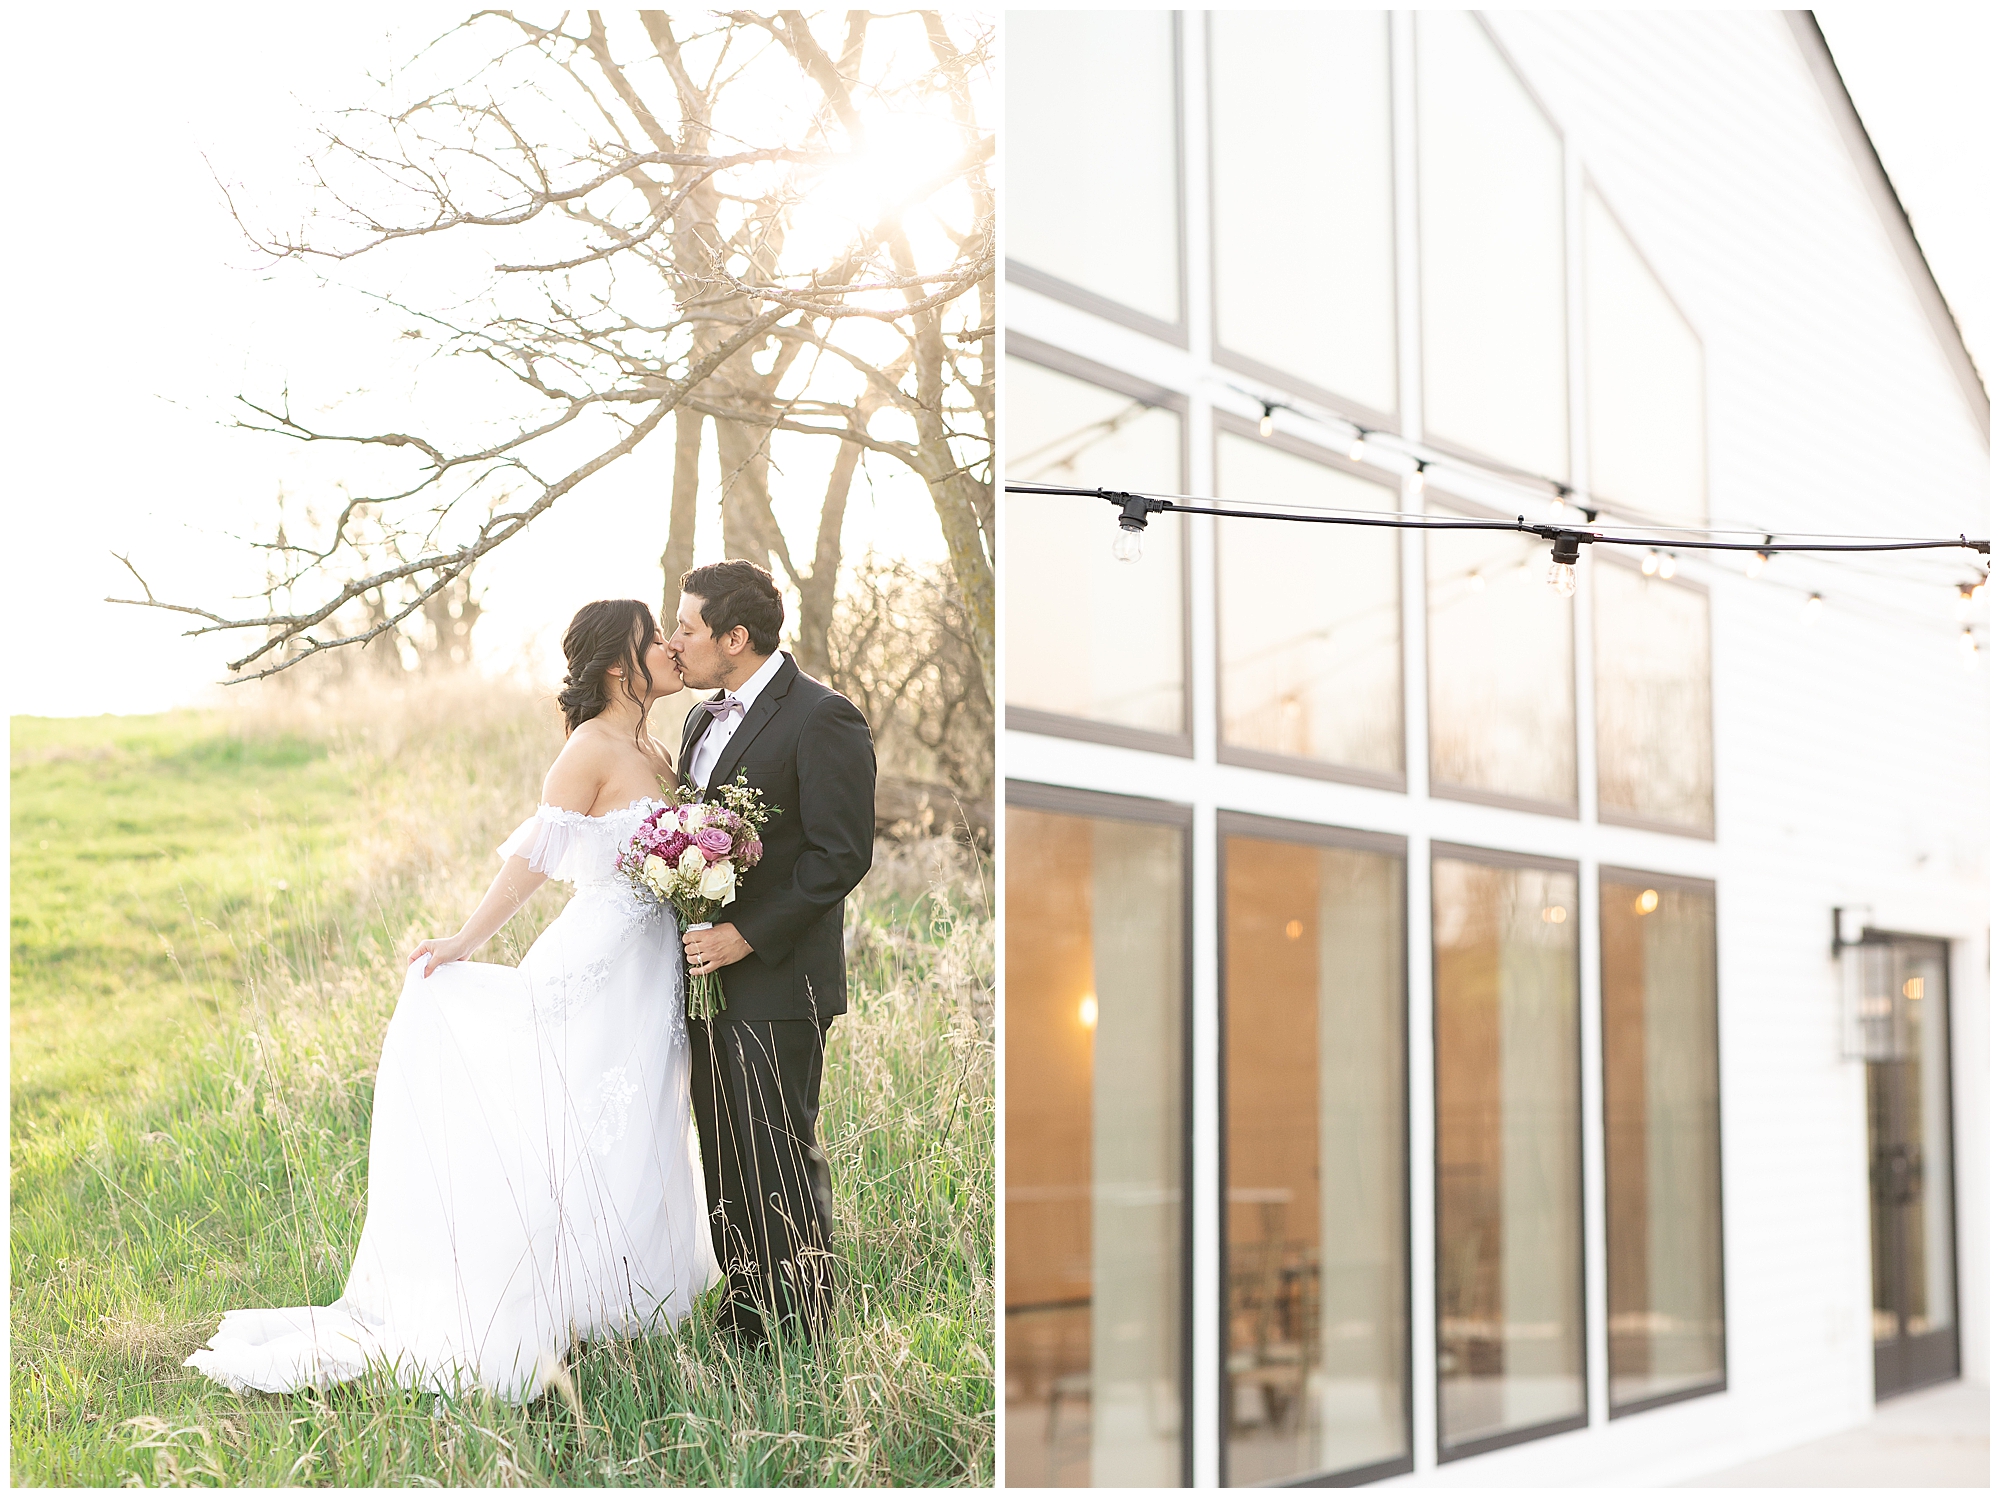 The Eloise Wedding Venue | Photograph by Kuffel Photography 